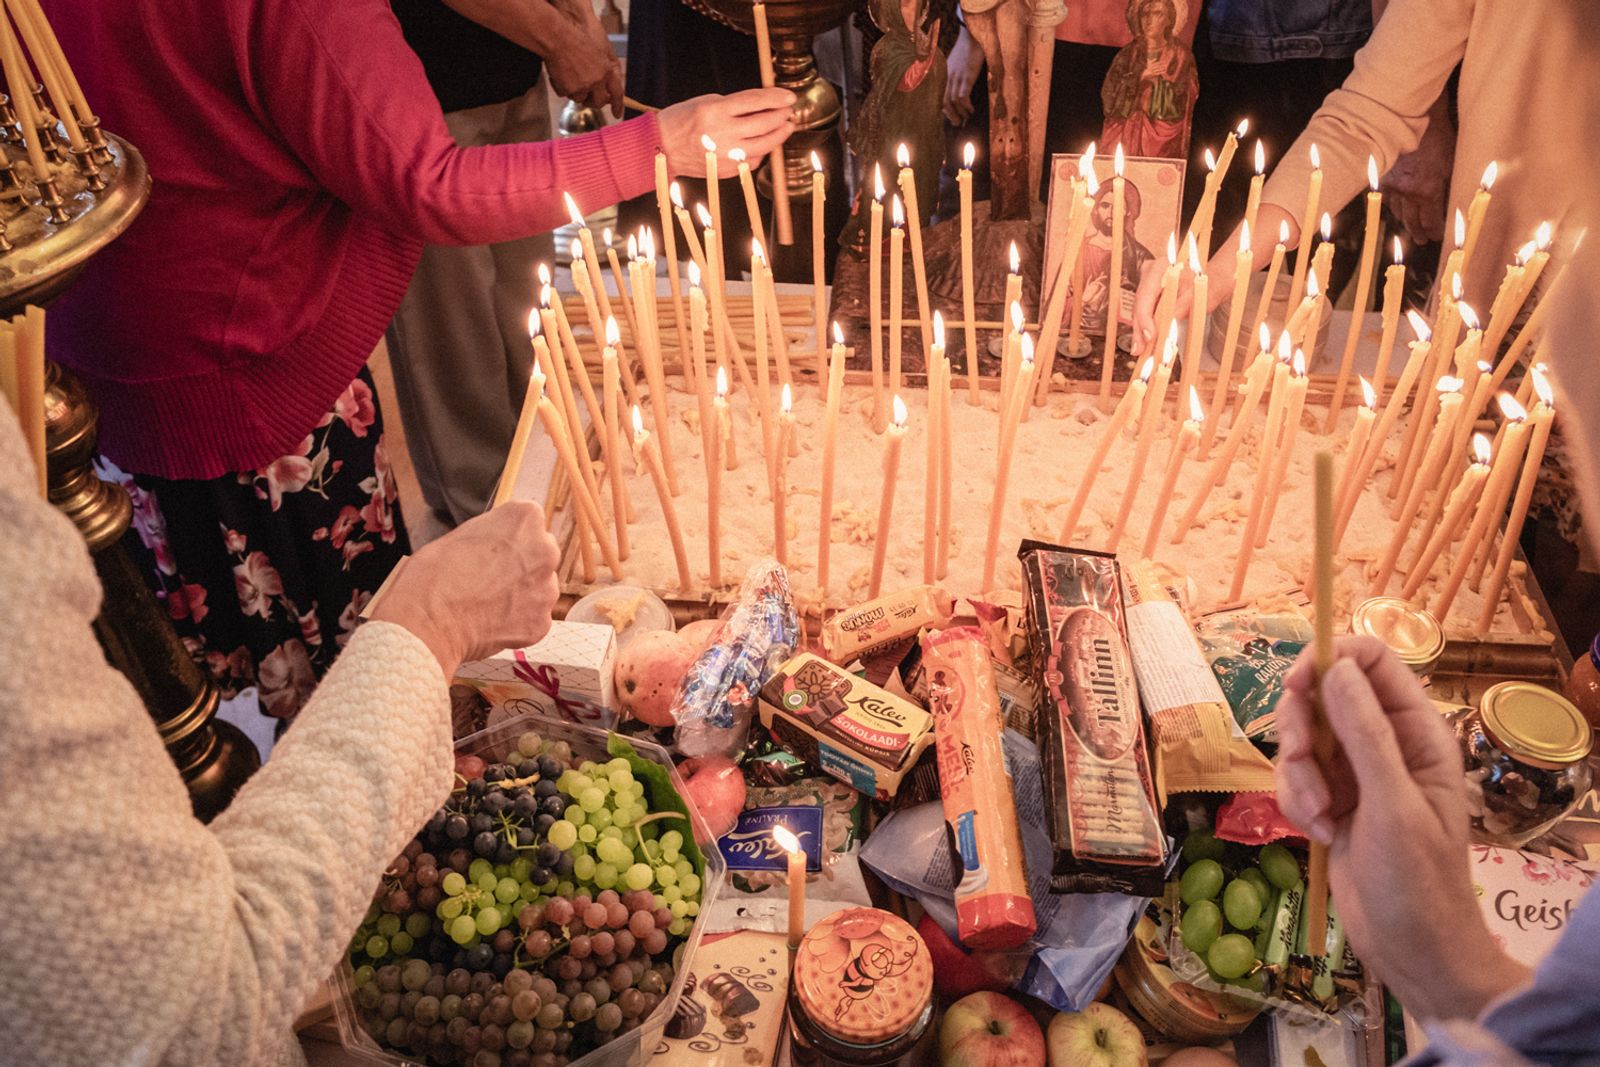 © daniela silvestri - During major religious celebrations, it is traditional to bring and share food offerings.